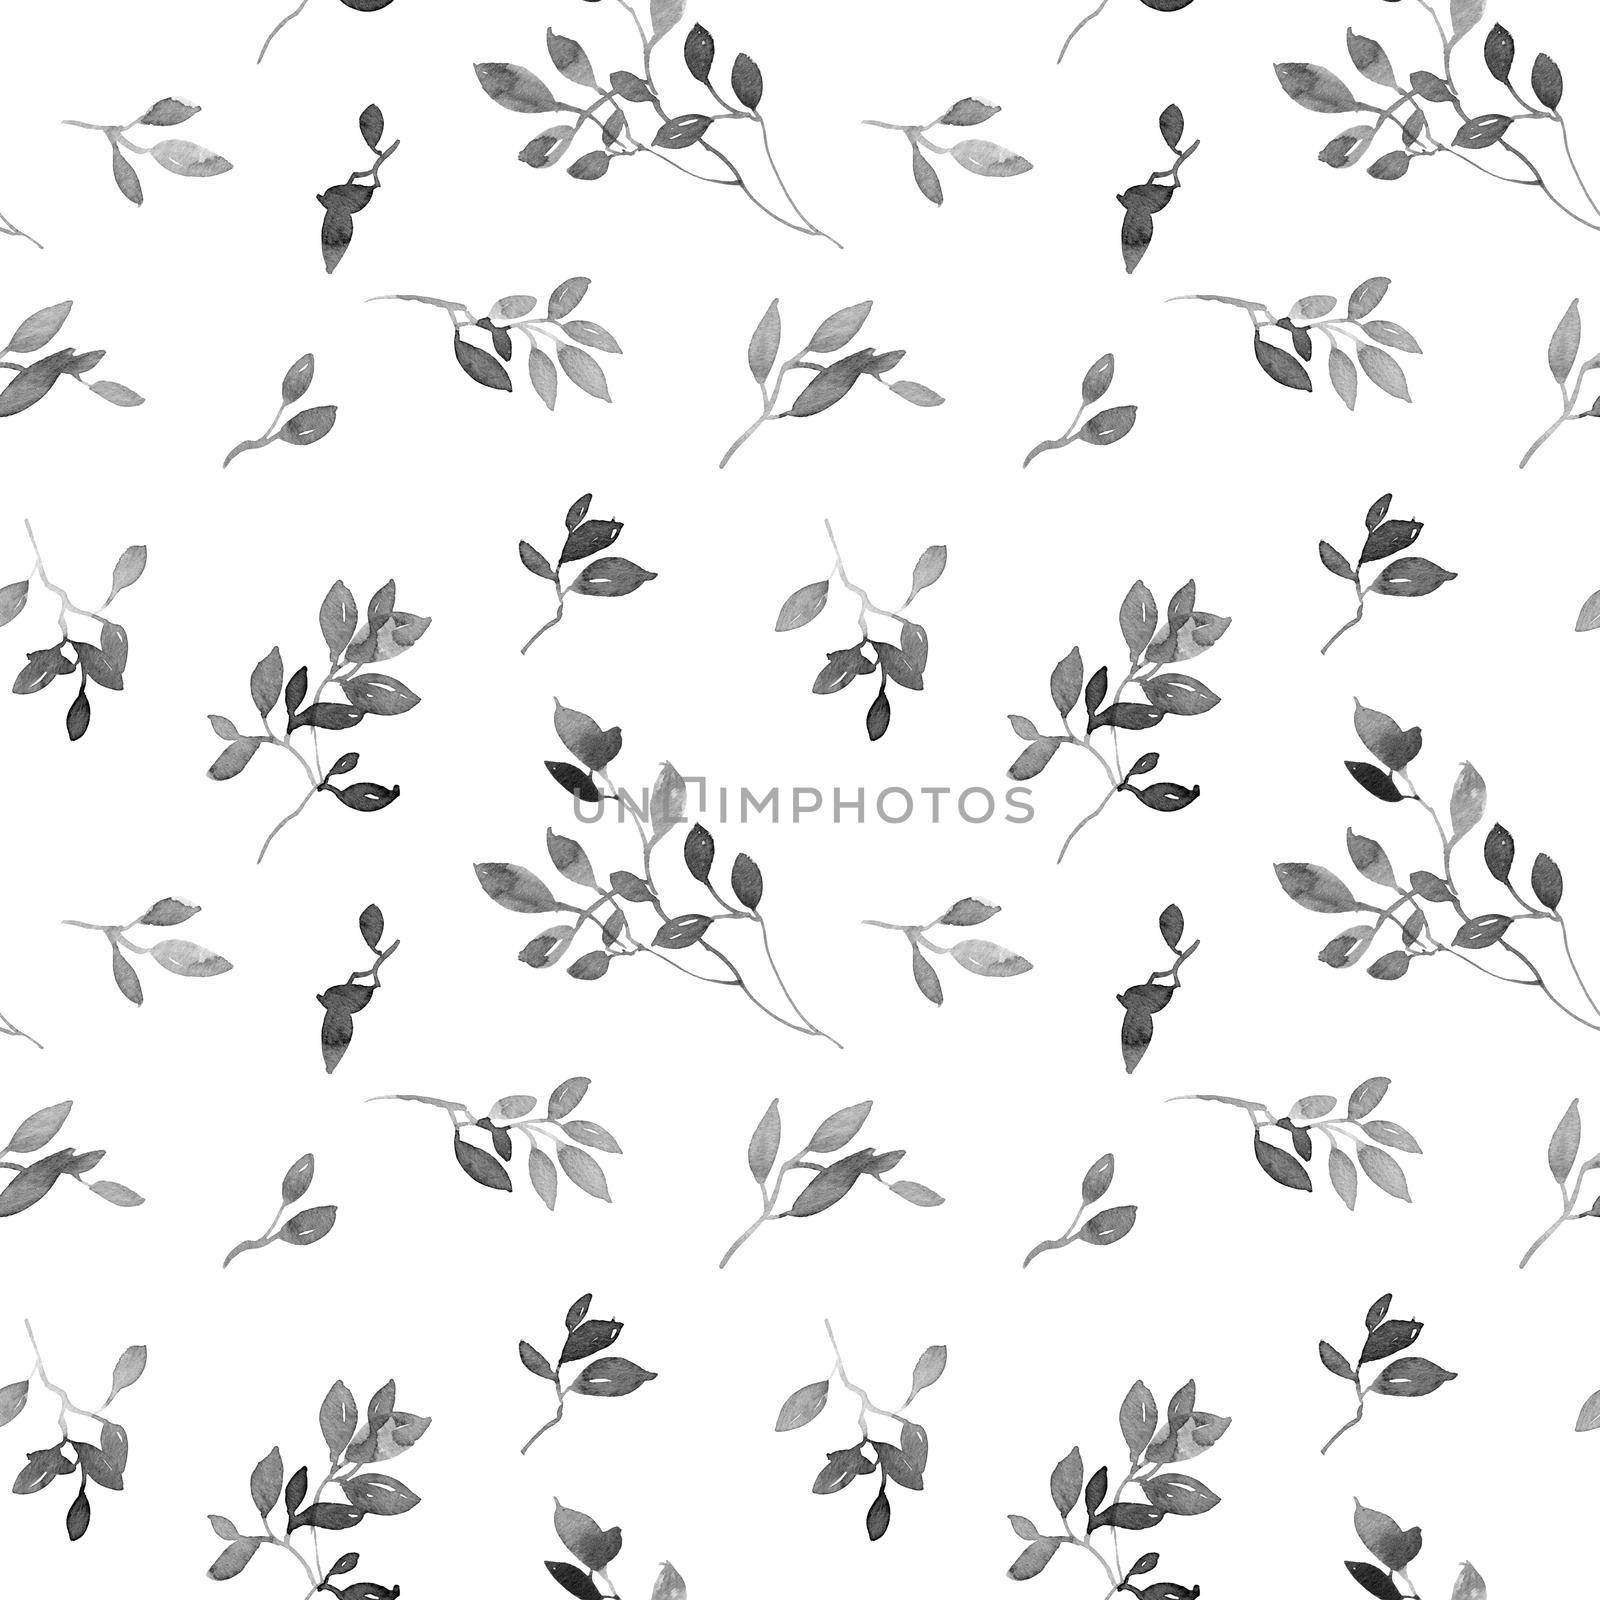 Black ink illustration of tree leaves - grayscale painting on white background. Oriental traditional painting in style sumi-e or gohua. Seamless pattern in minimalistic style.